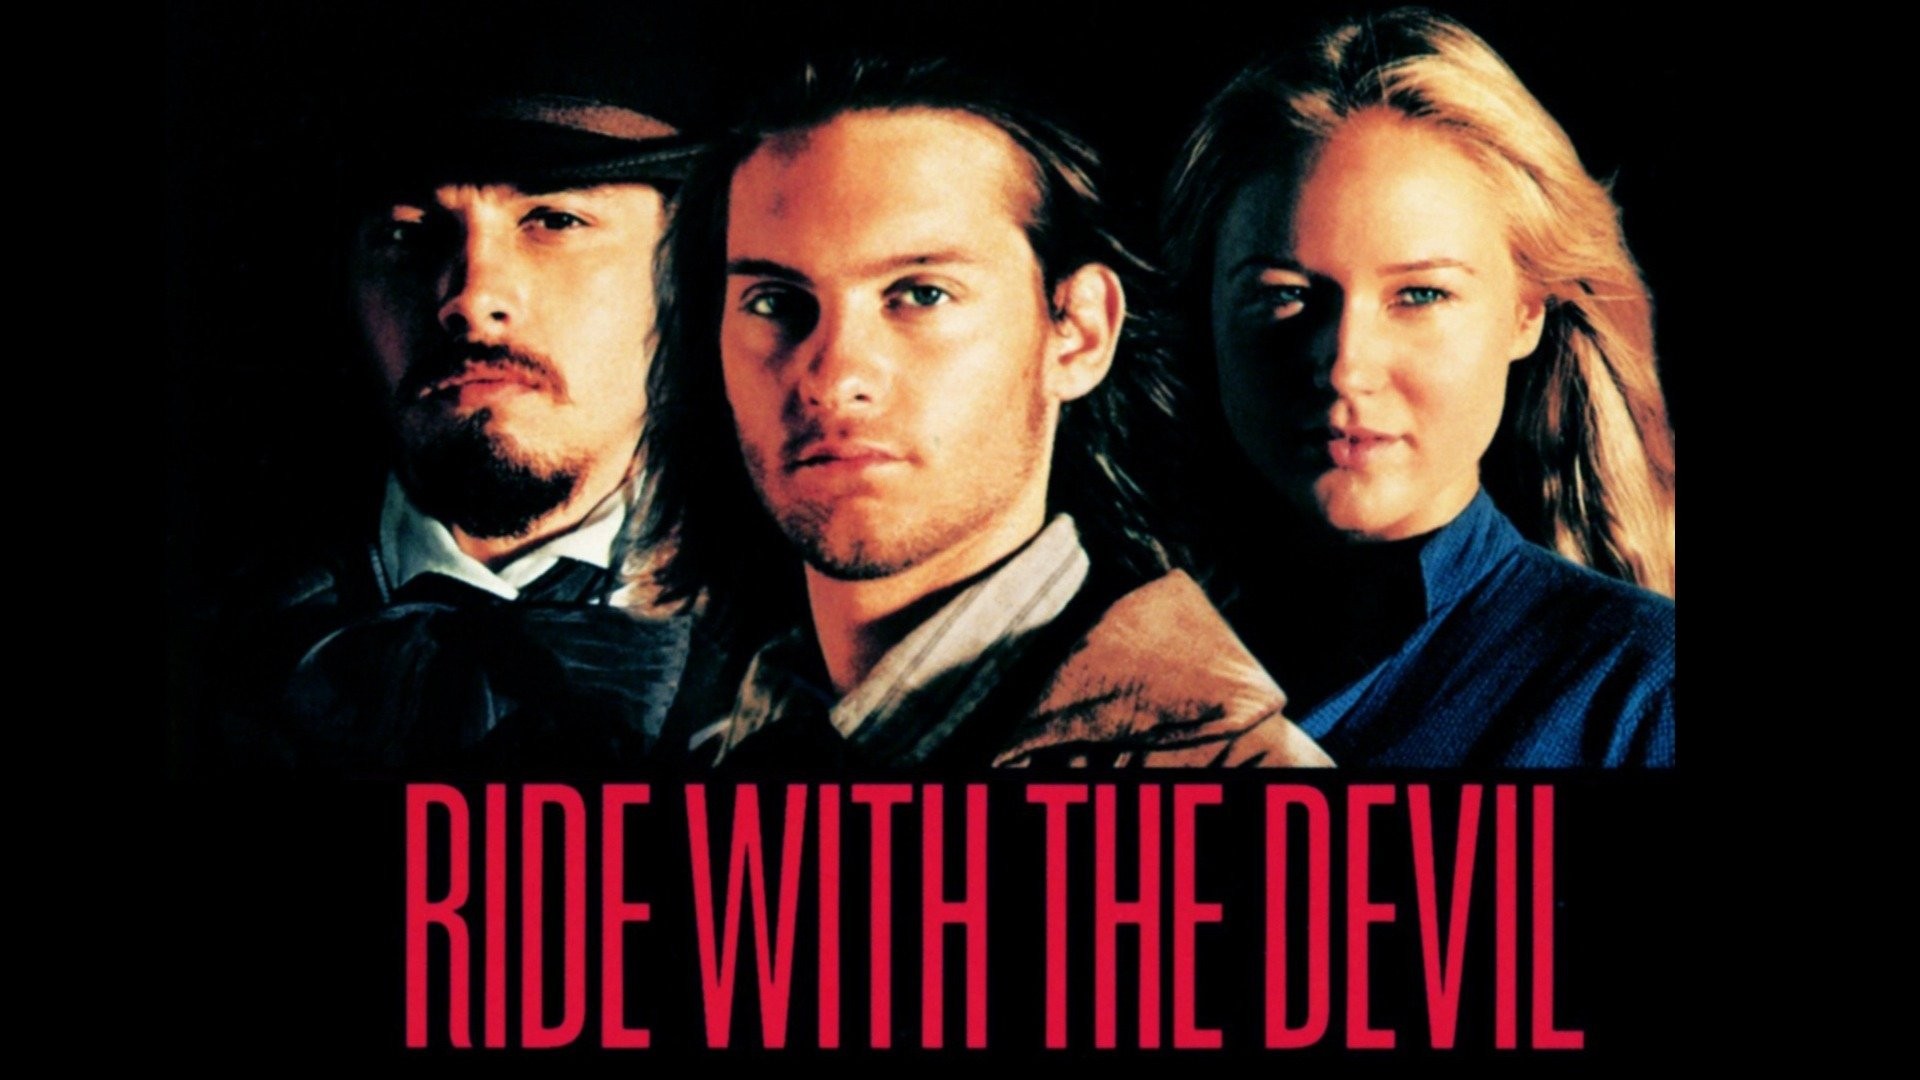 Ride with the Devil - movie: watch streaming online